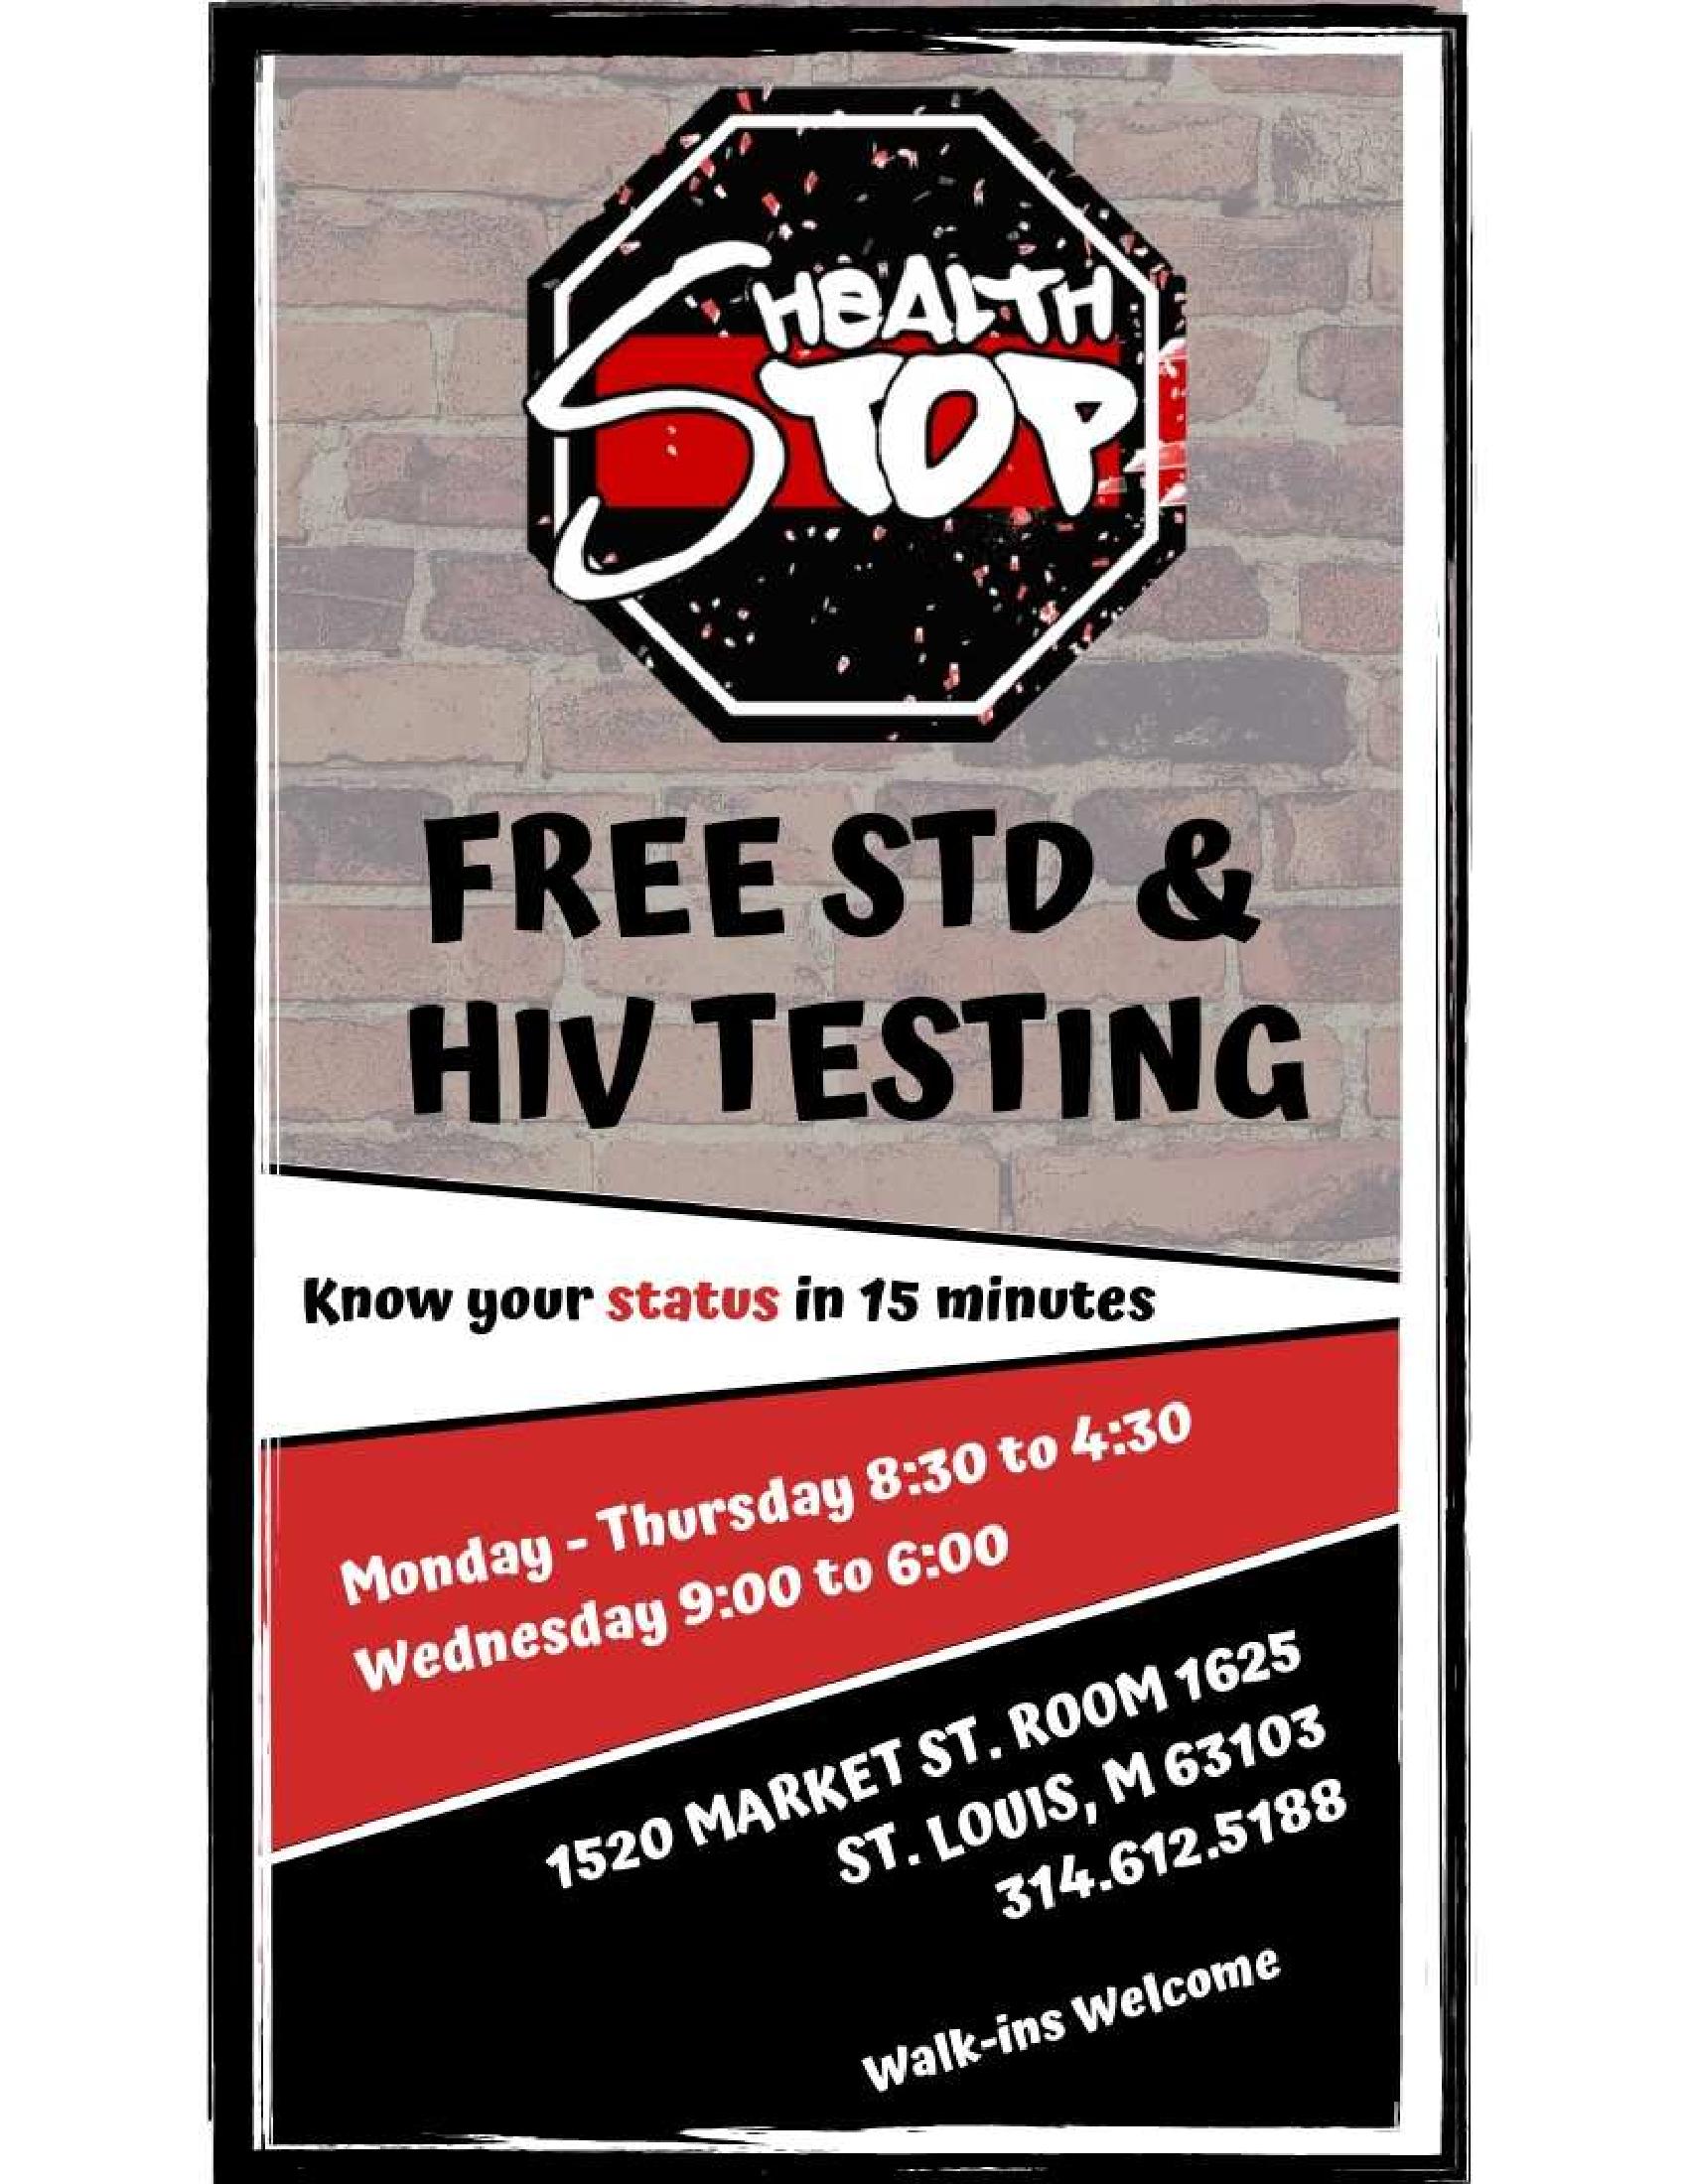 sexual health testing site flyer